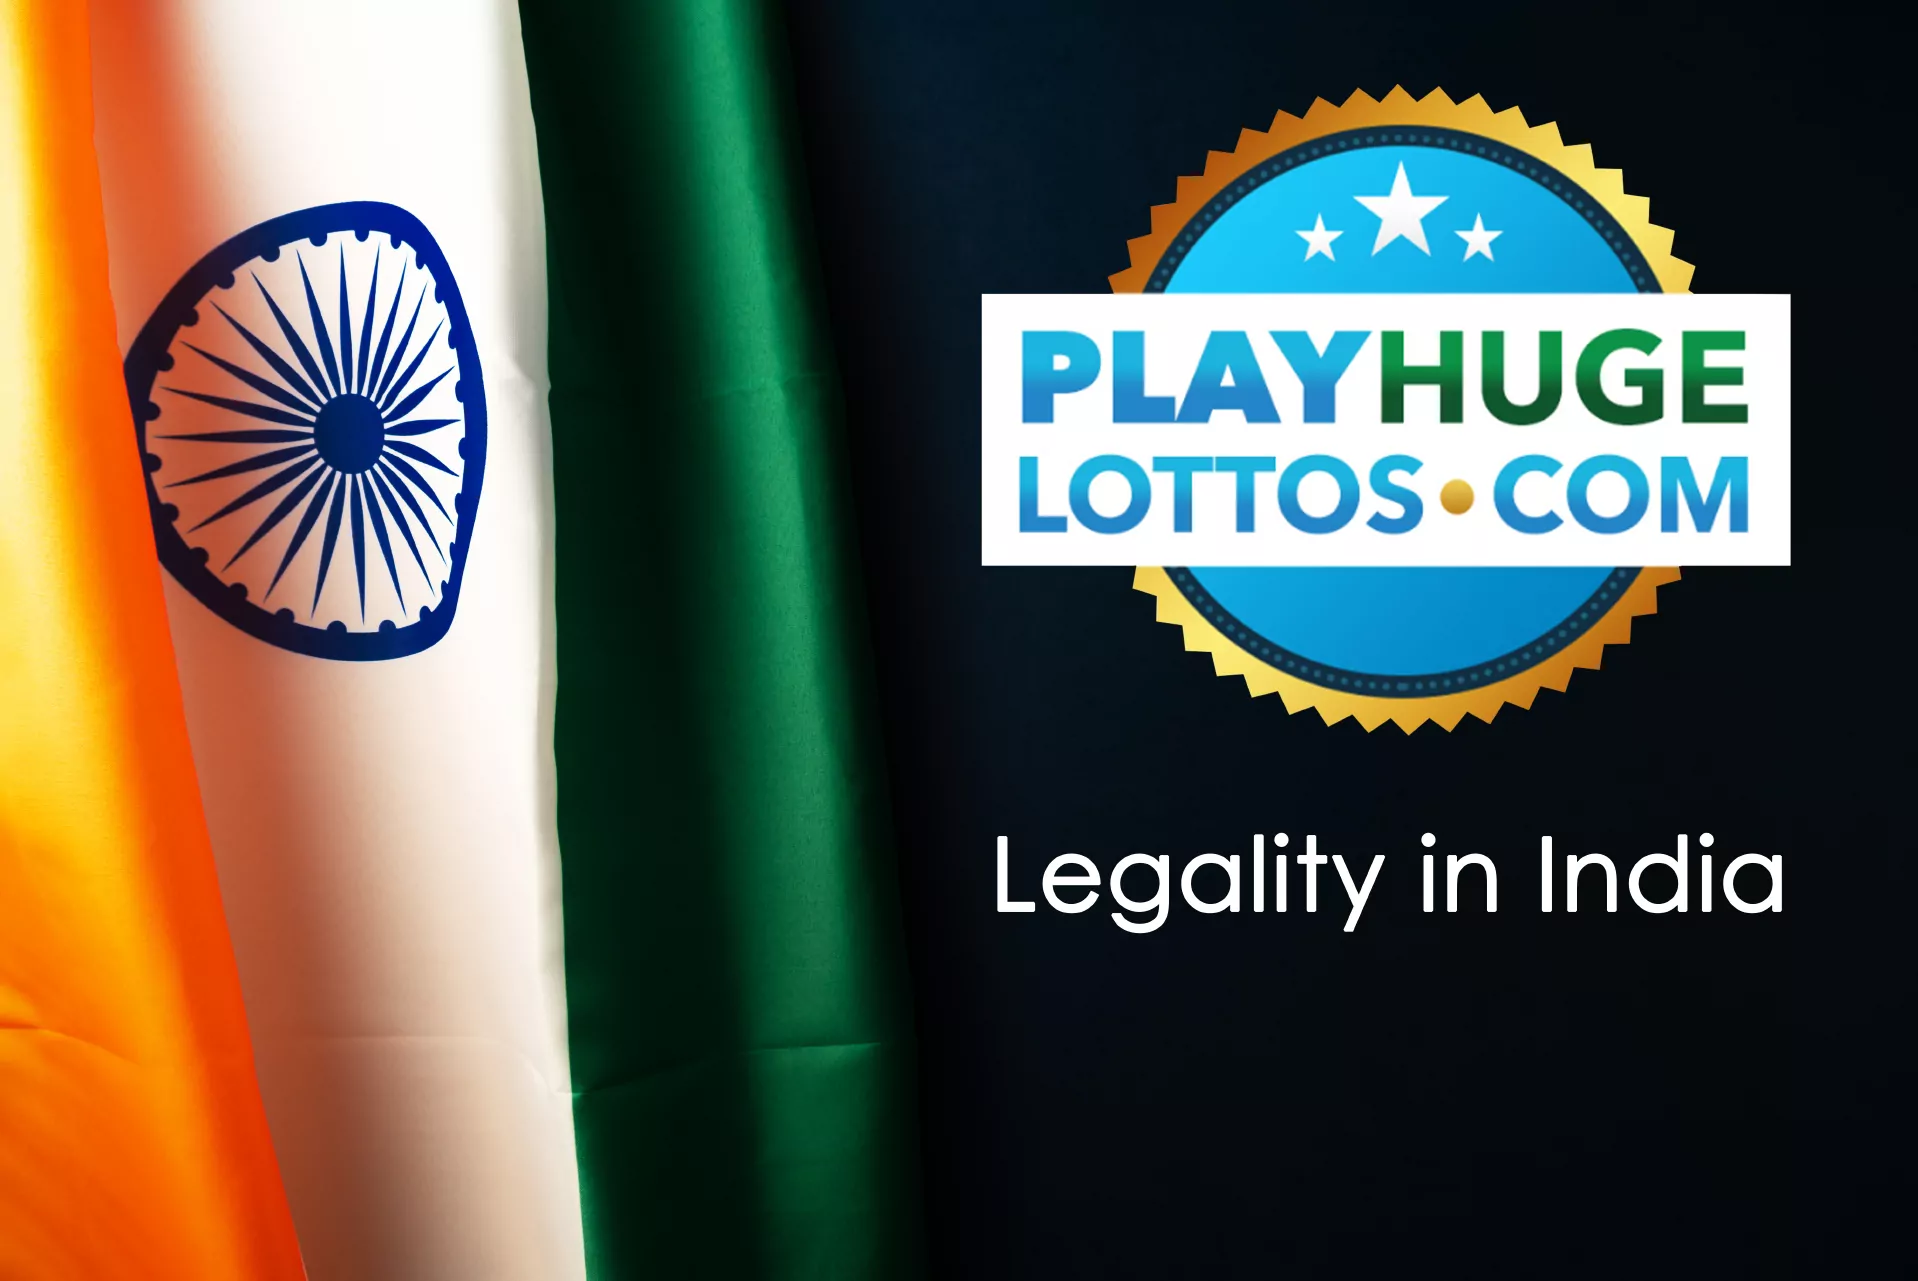 Buying lottery tickets on PlayHugeLotto is legal for Indian users.